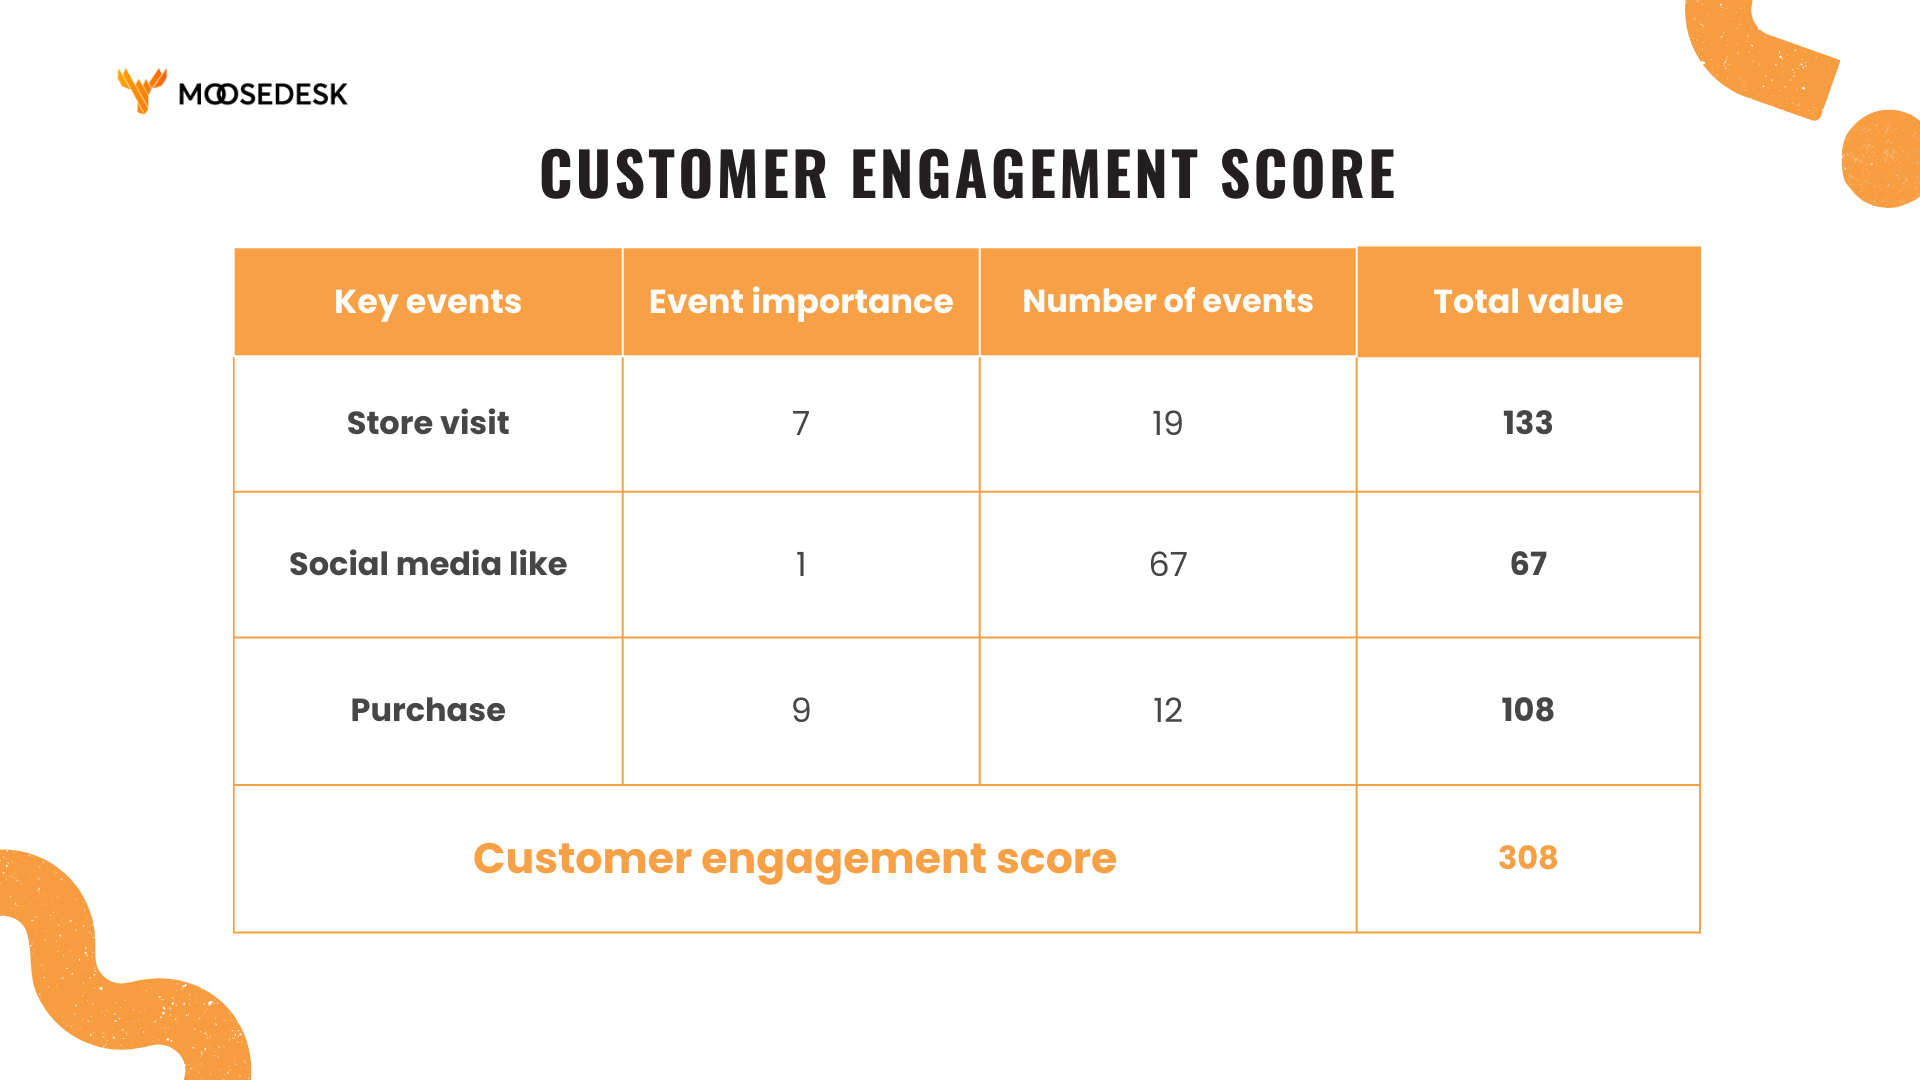 How to calculate customer engagement score